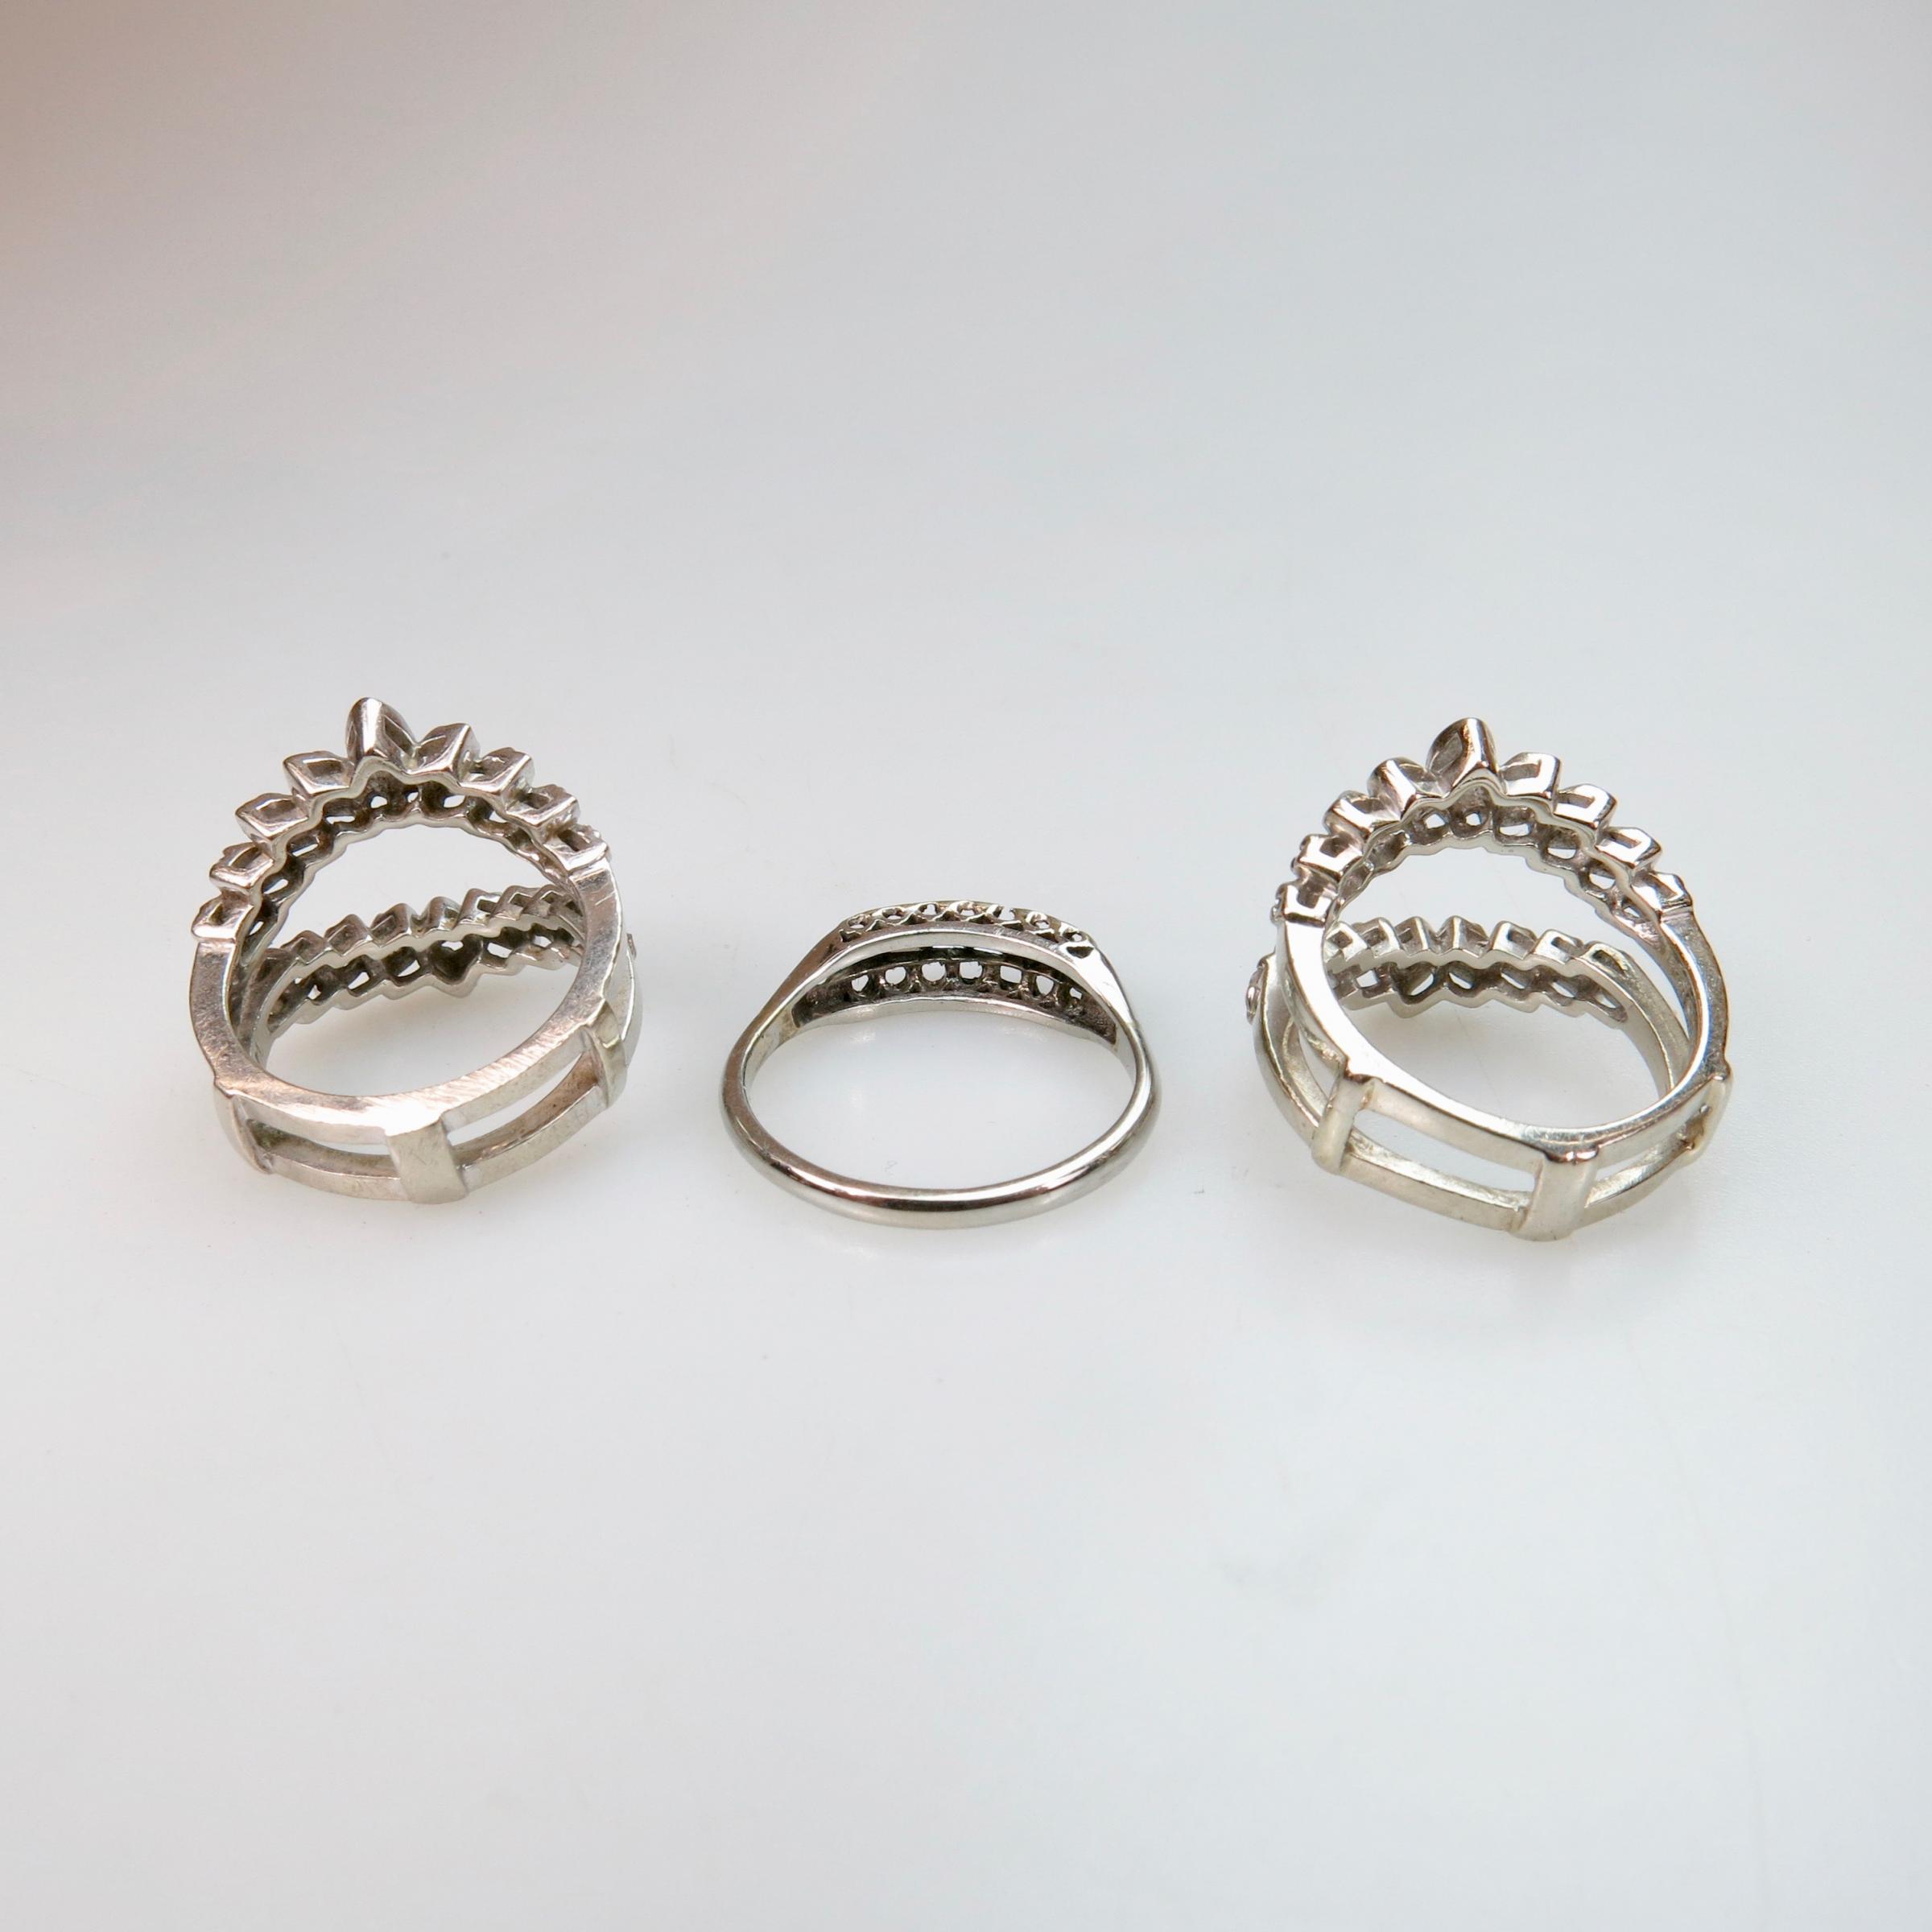 2 x 14k White Gold Outer Guard Rings And 1 x 18k White Gold Band